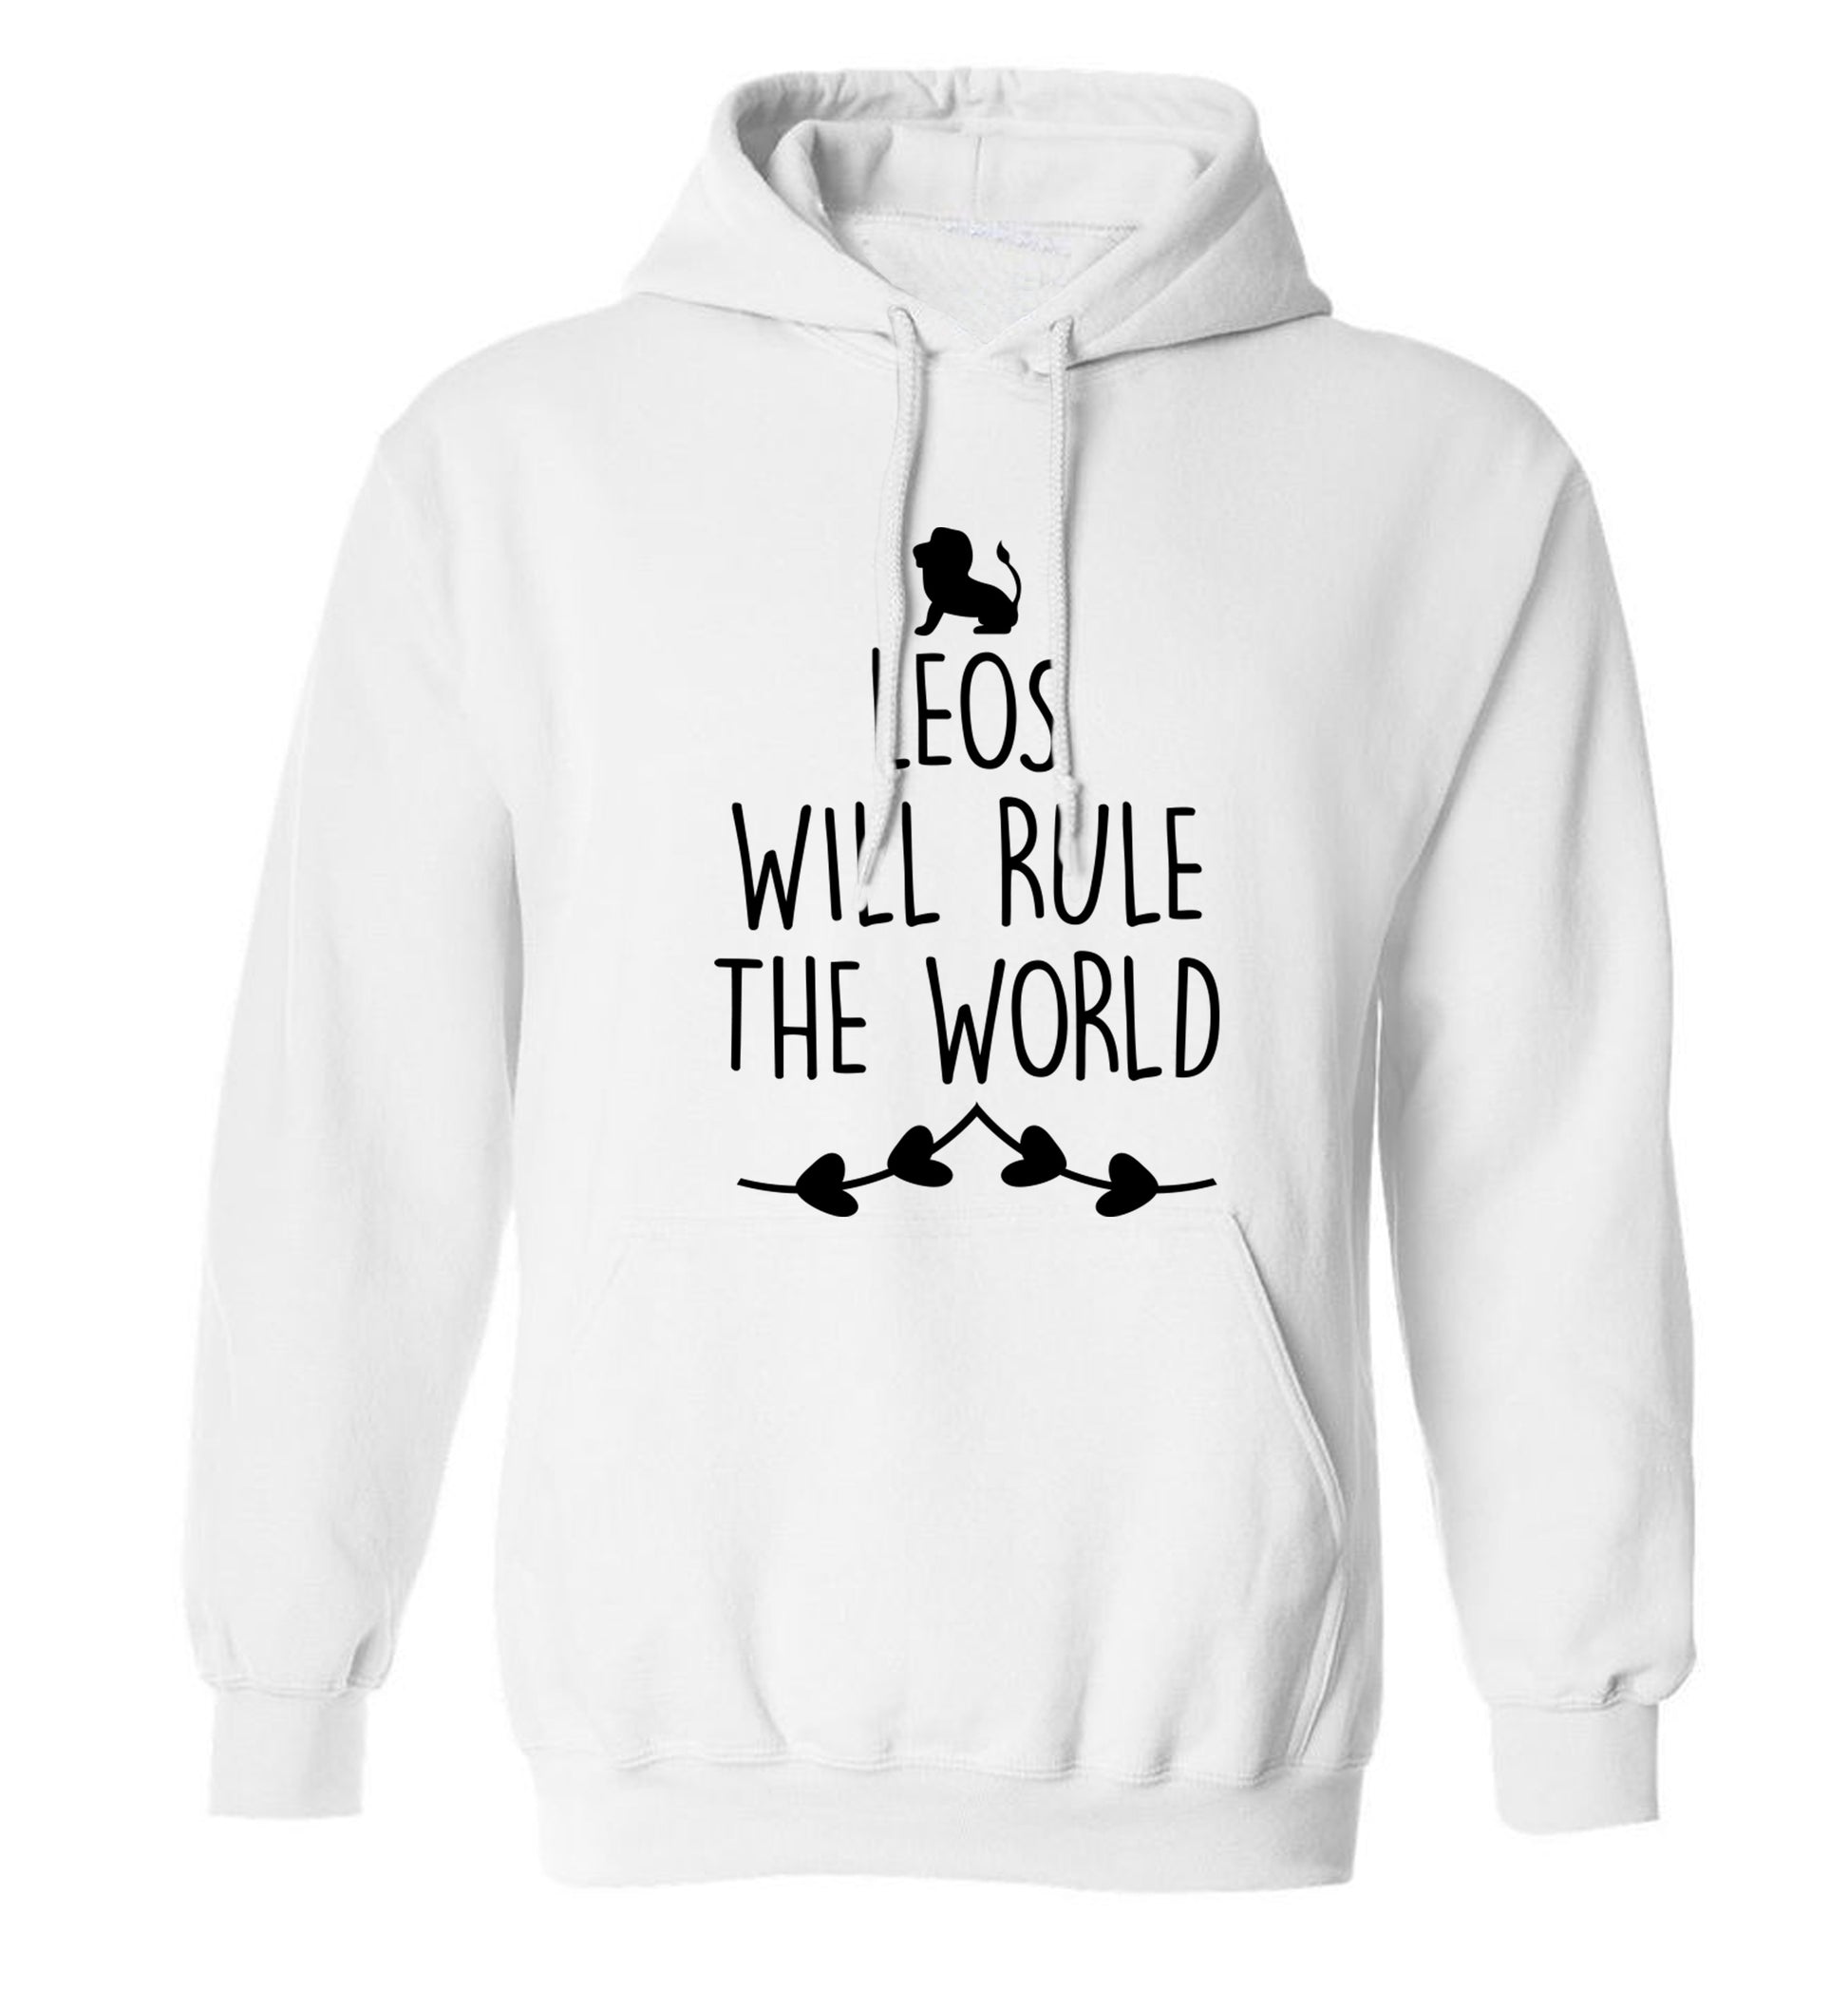 Leos will run the world adults unisex white hoodie 2XL